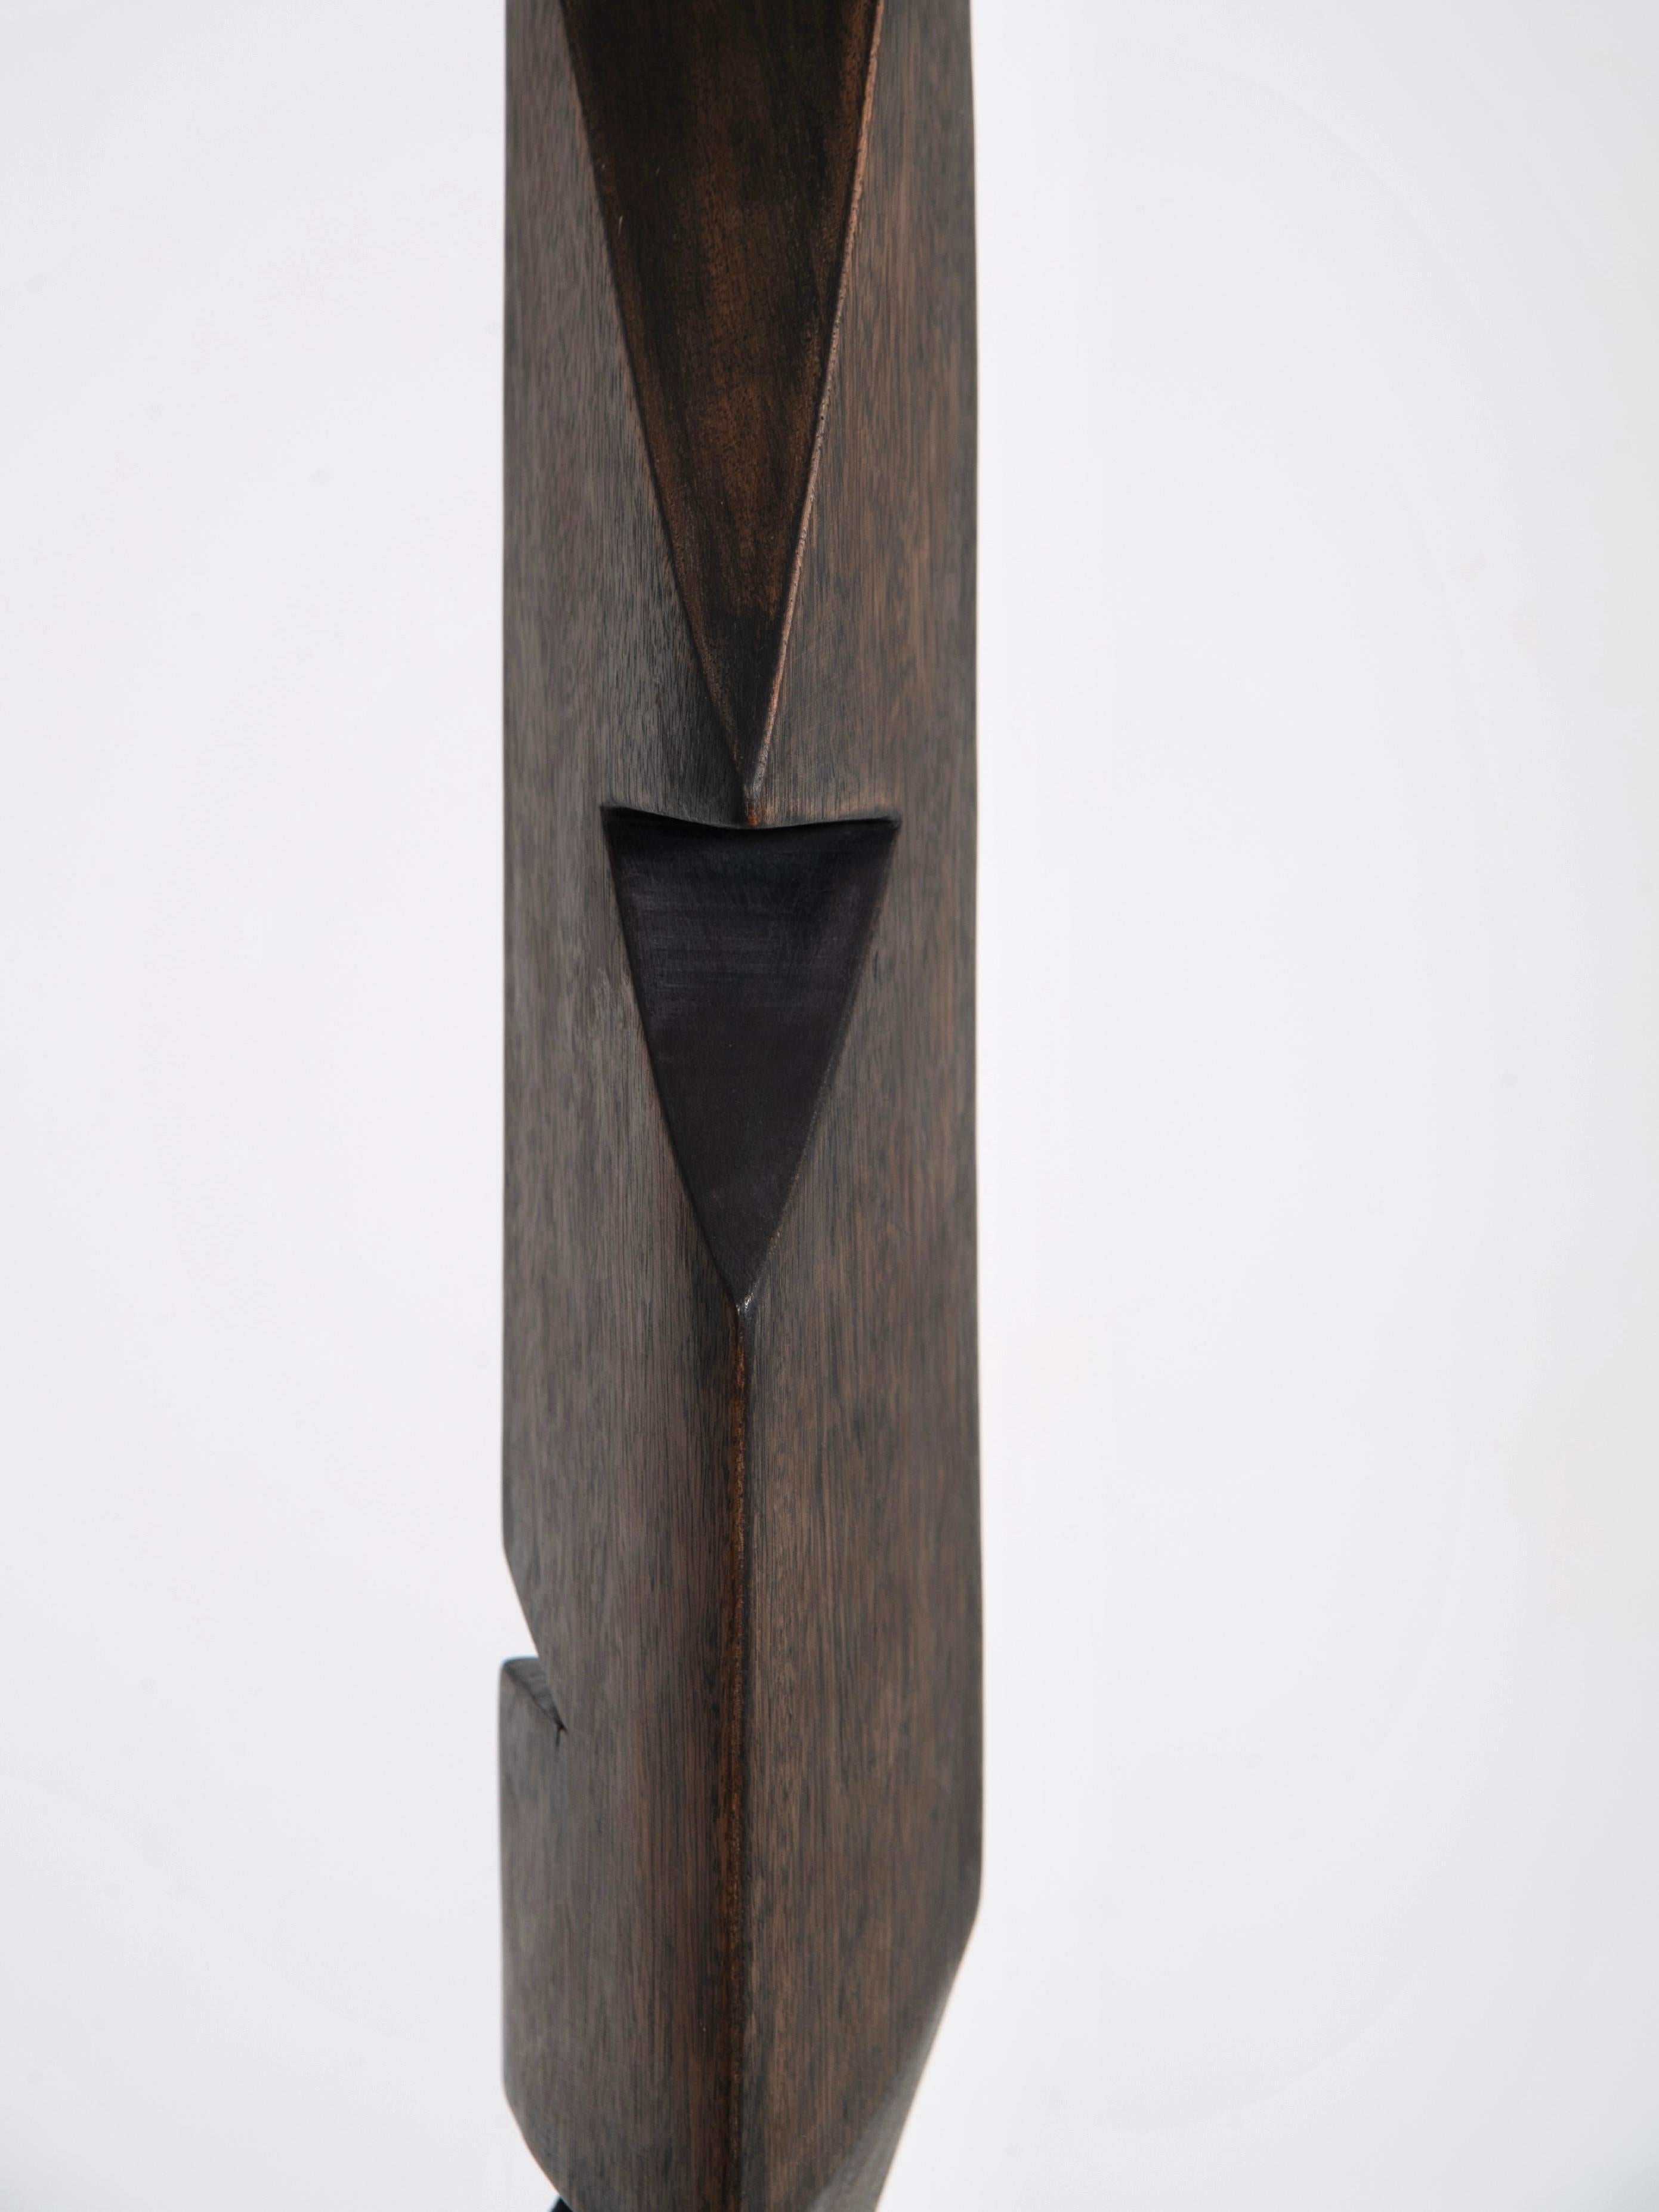 Hand-Carved 20th Century Modern Abstract TOTEM Sculpture by Bertrand Créach For Sale